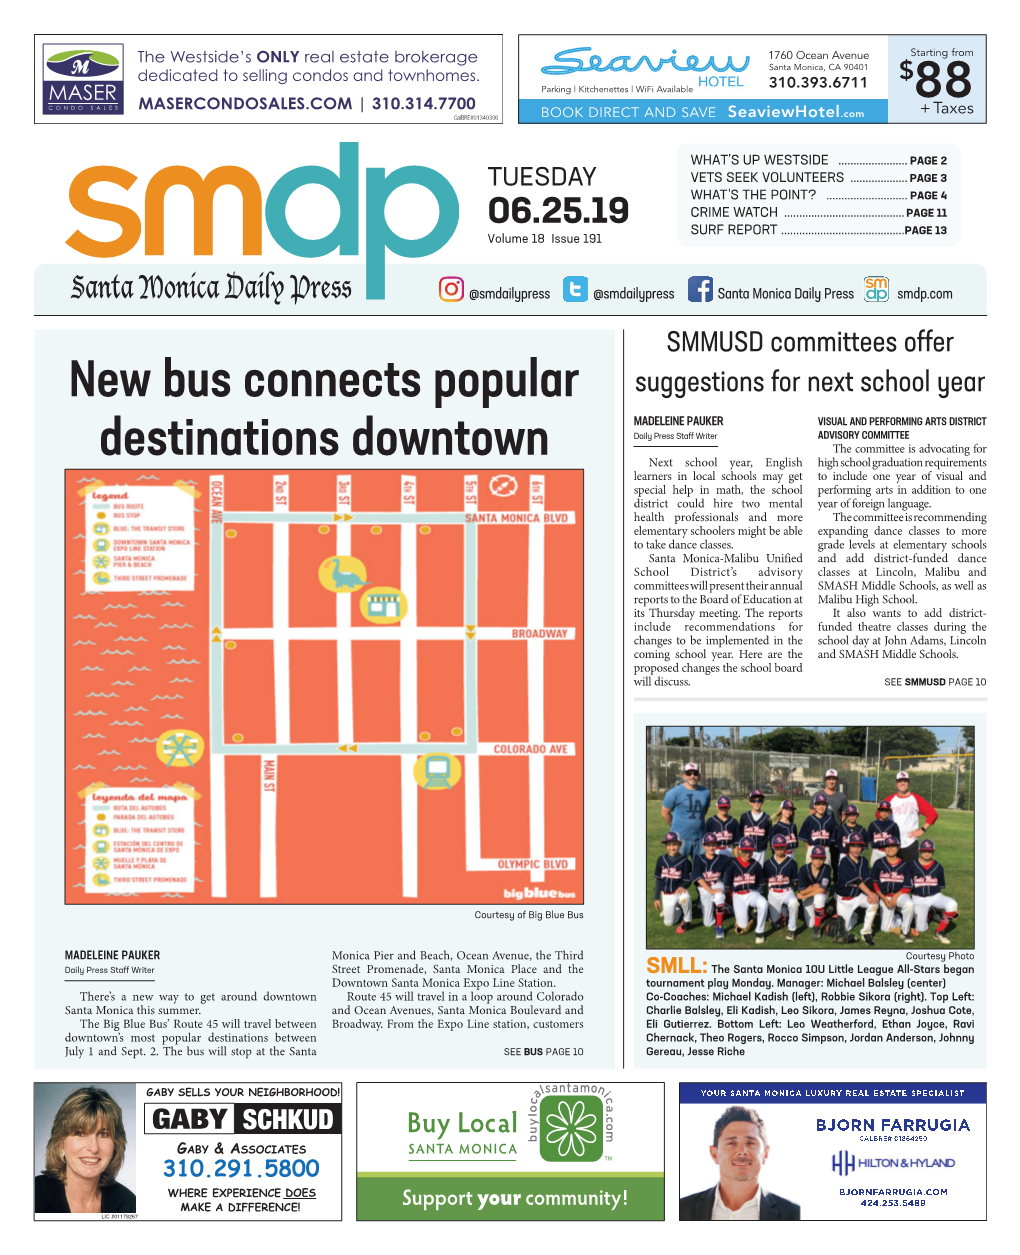 88 New Bus Connects Popular Destinations Downtown